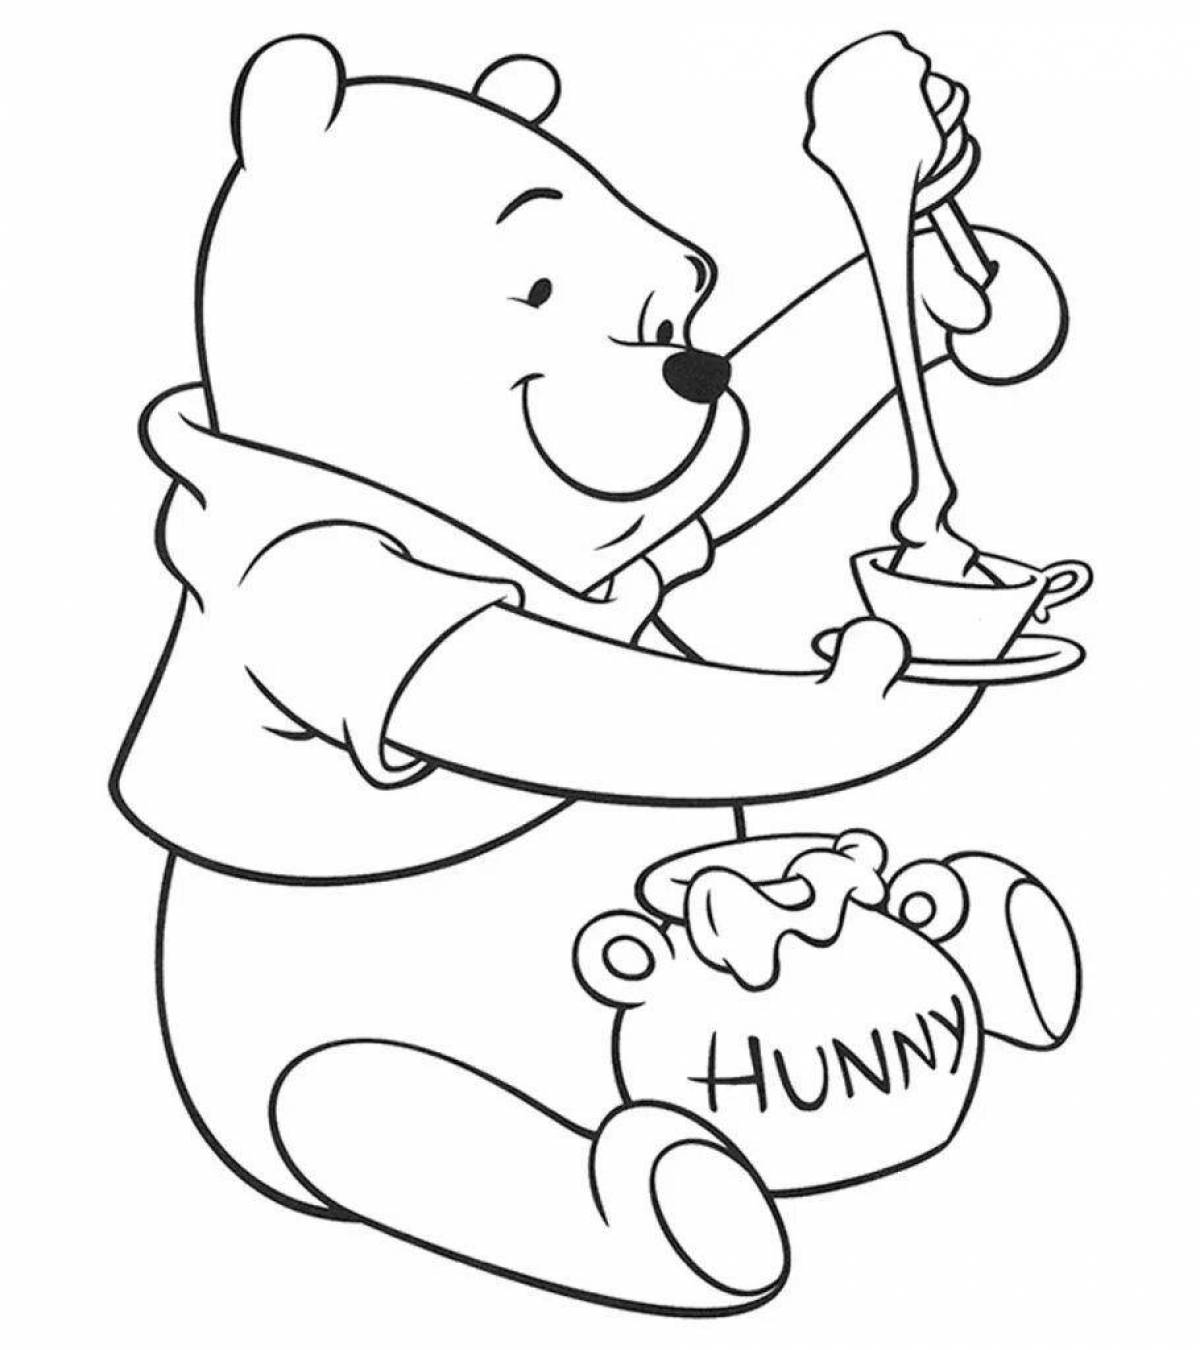 Winnie the pooh quirky coloring book for kids